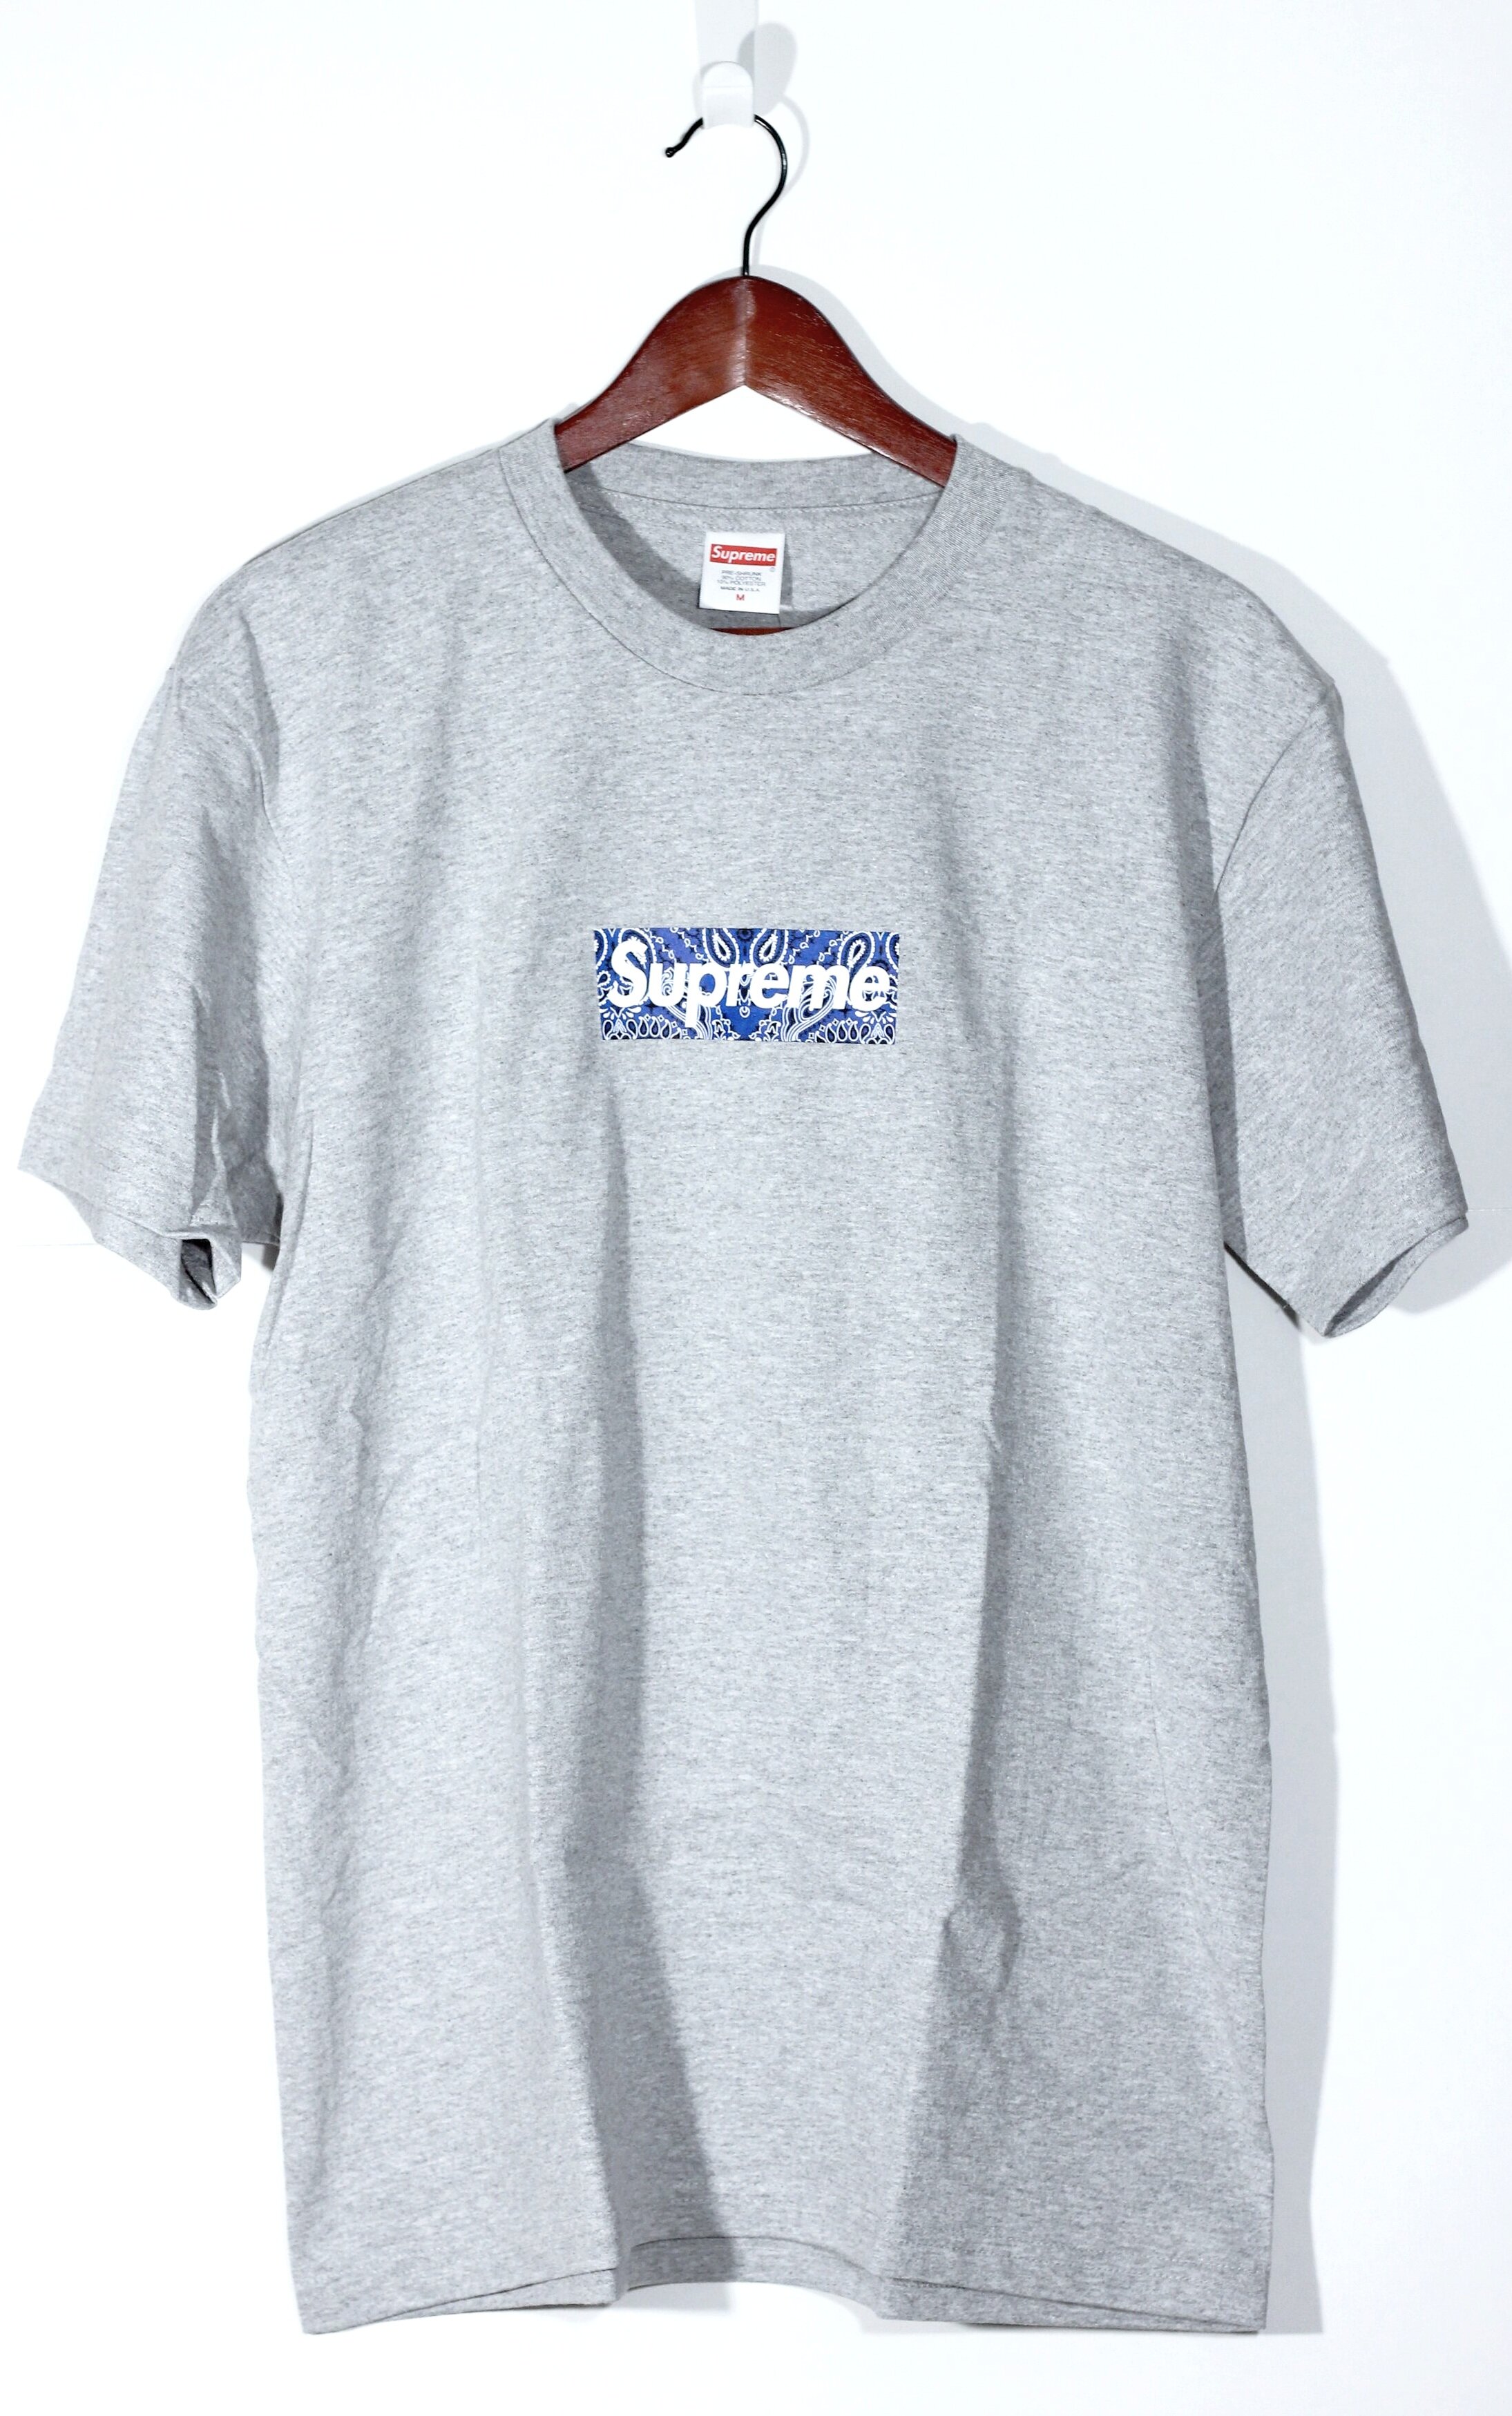 Supreme Box Logo Tee Online Store, UP TO 51% OFF | www 